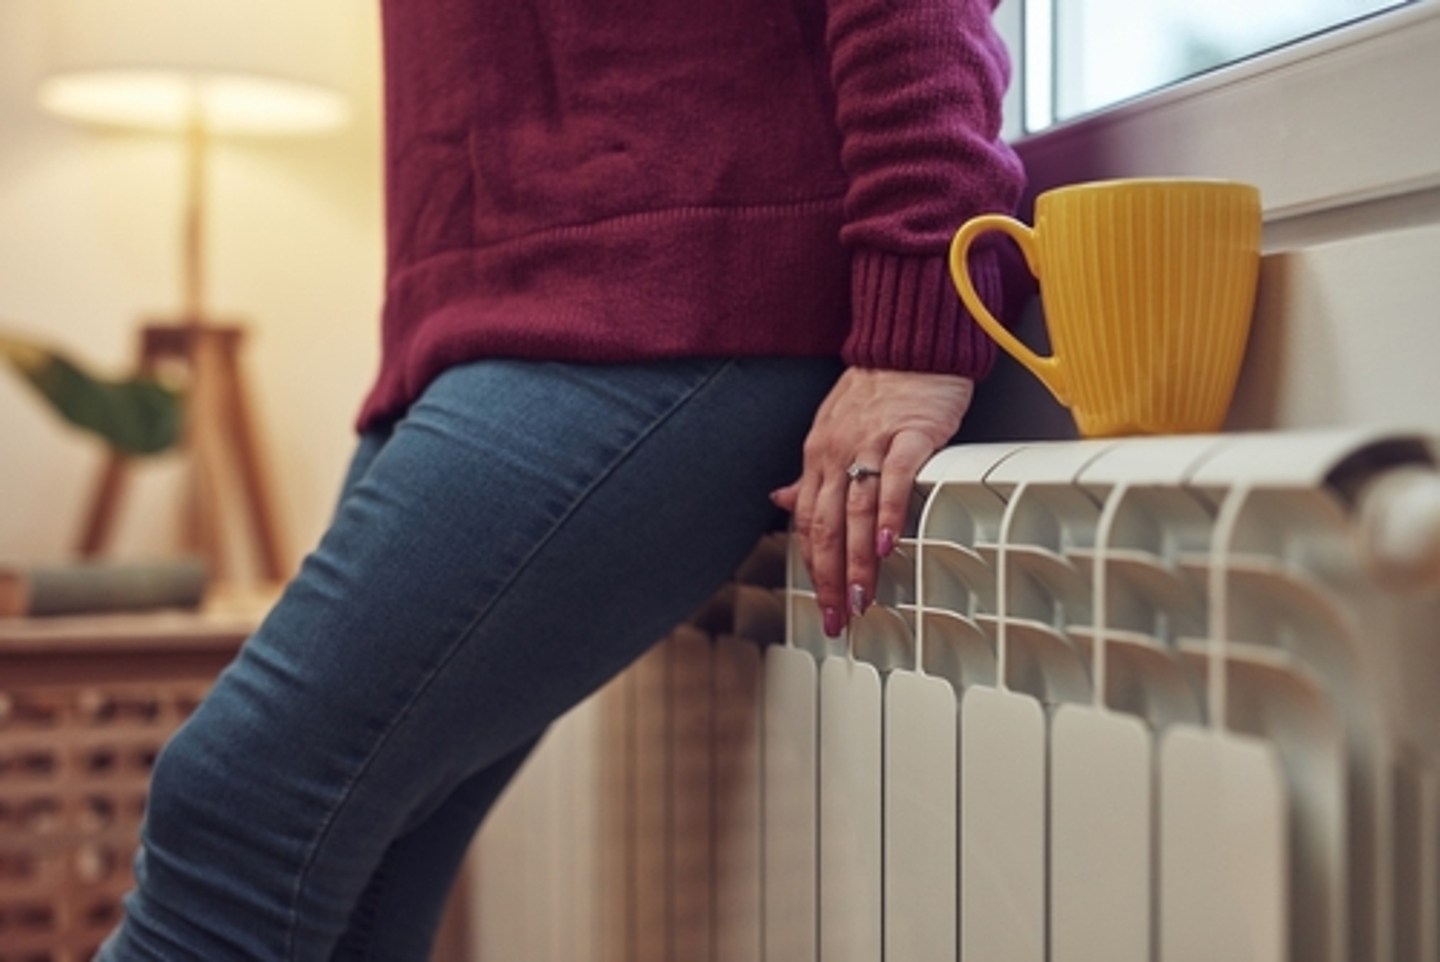 Woman in red sweater and jeans leaning on a heat radiator